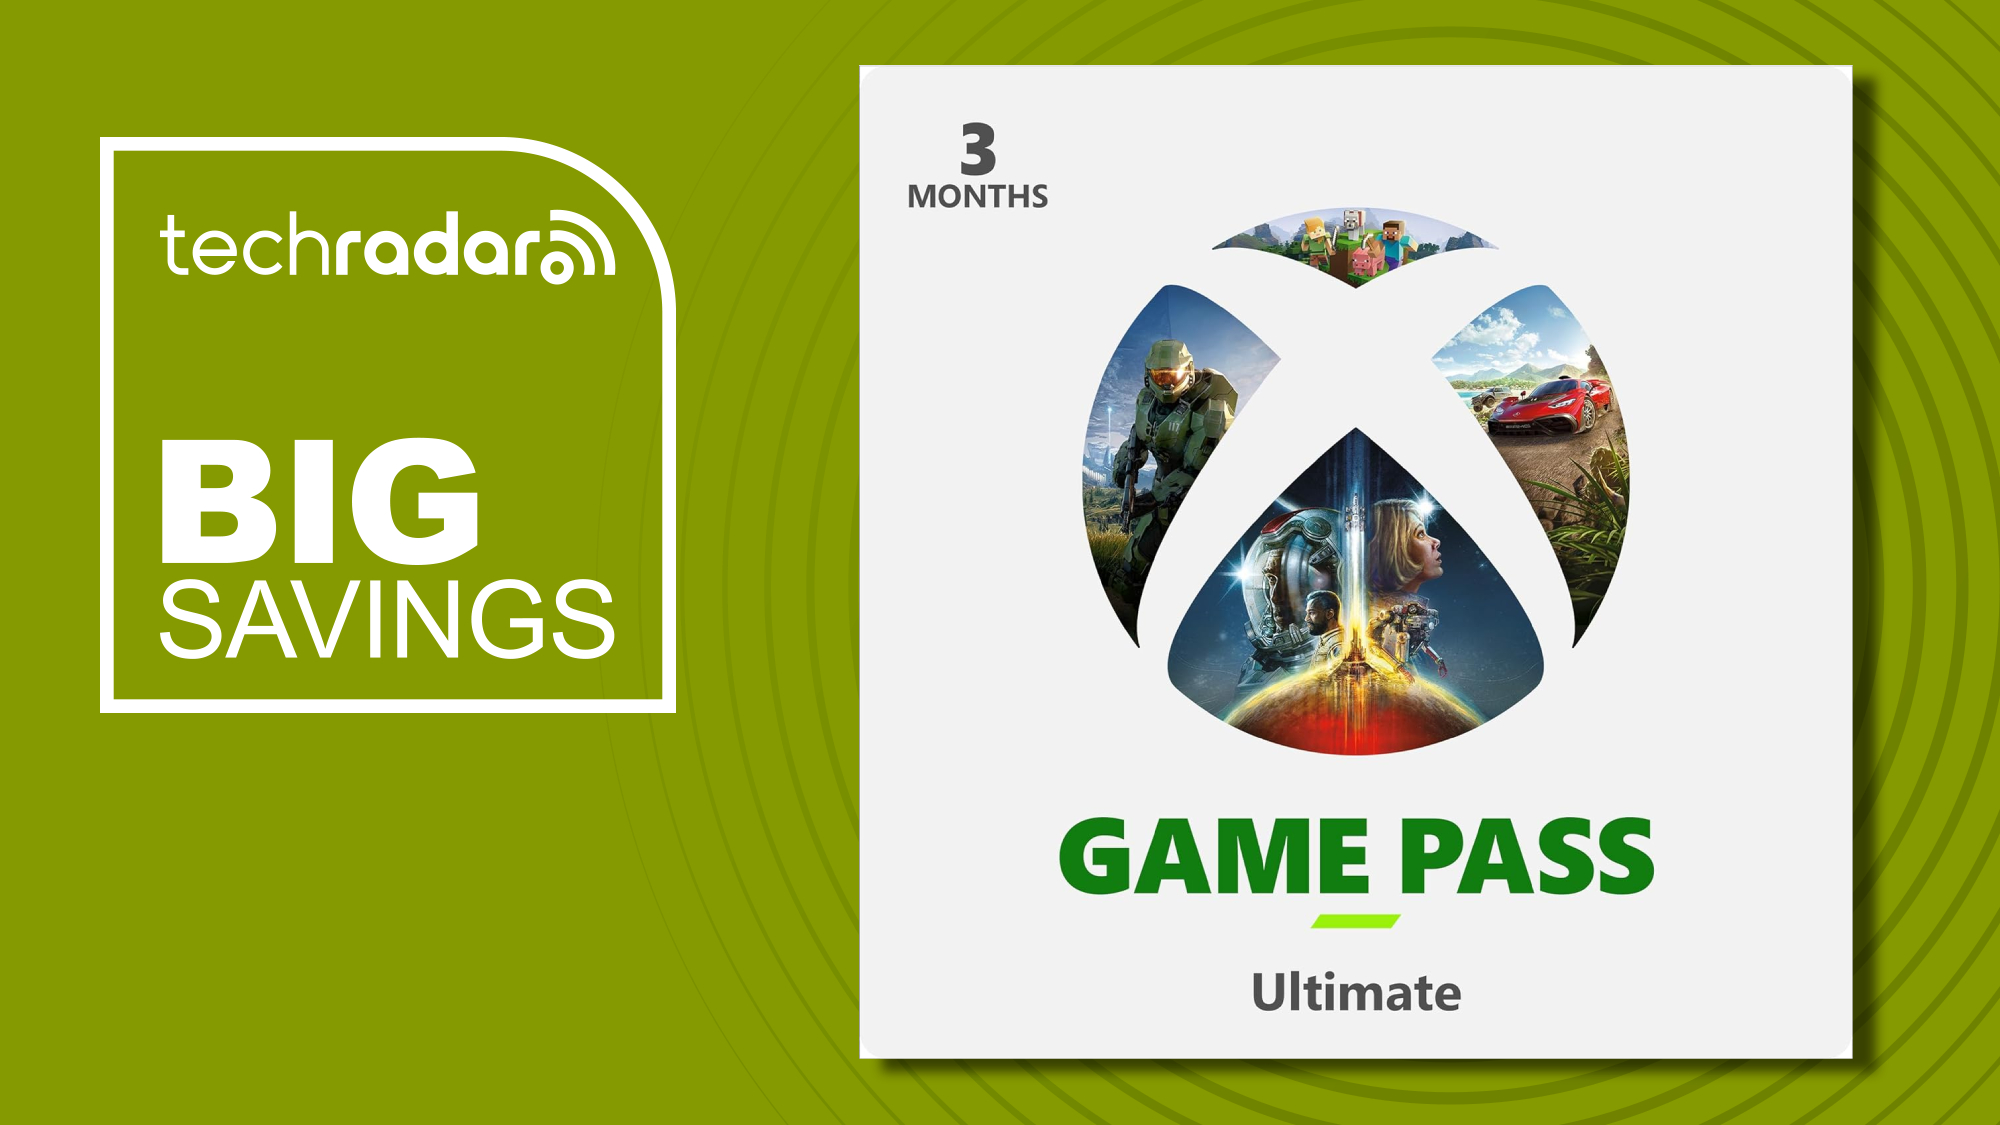 Xbox Game Pass vs Xbox Game Pass Ultimate: which subscription is right for  you?